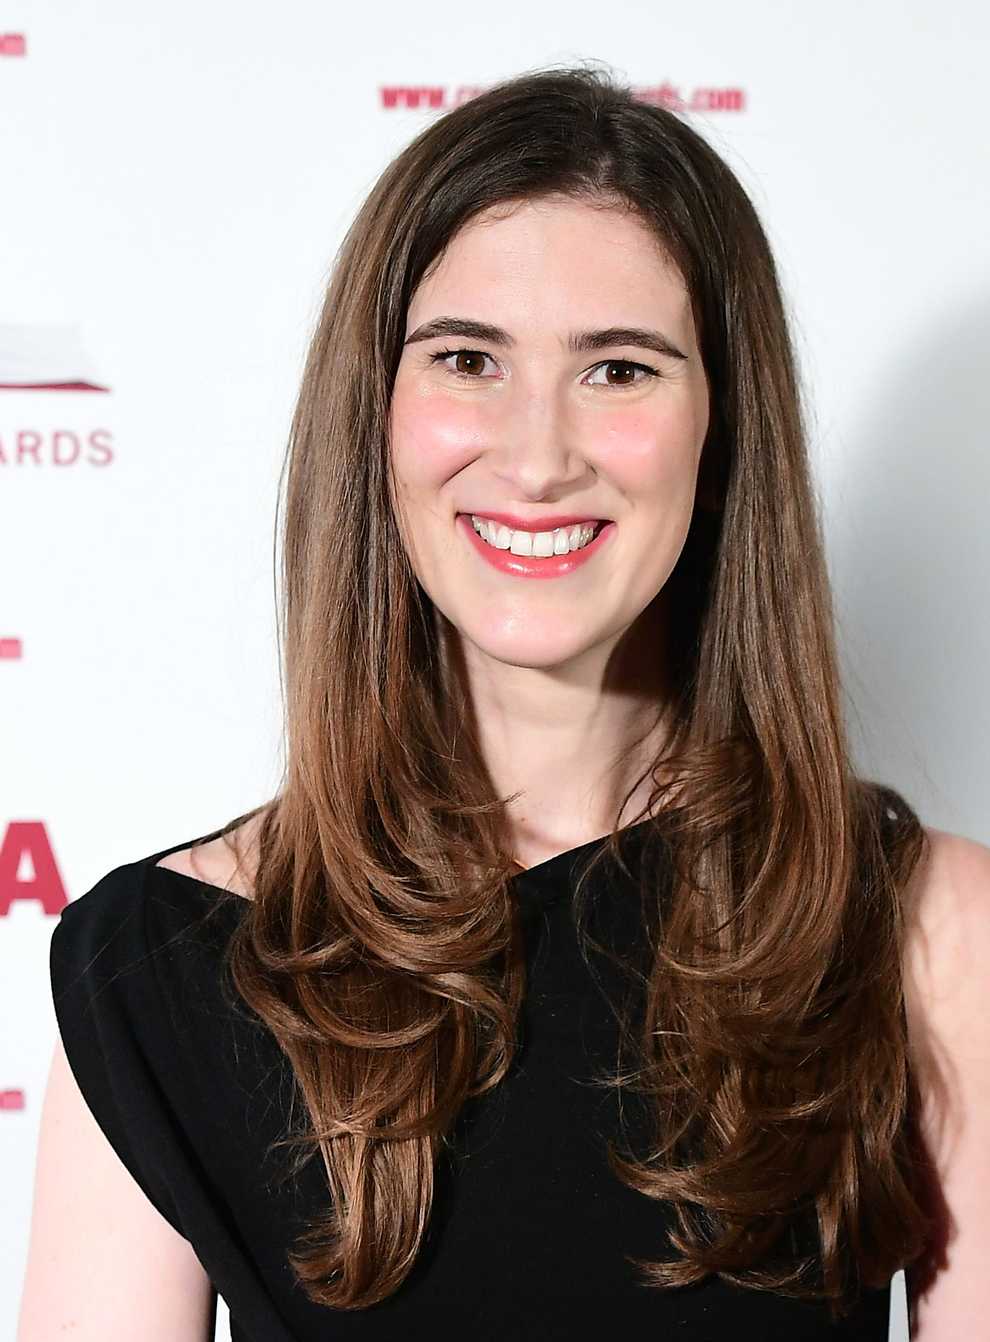 Katherine Rundell was crowned the winner at a ceremony held at the Science Museum (Ian West/PA)